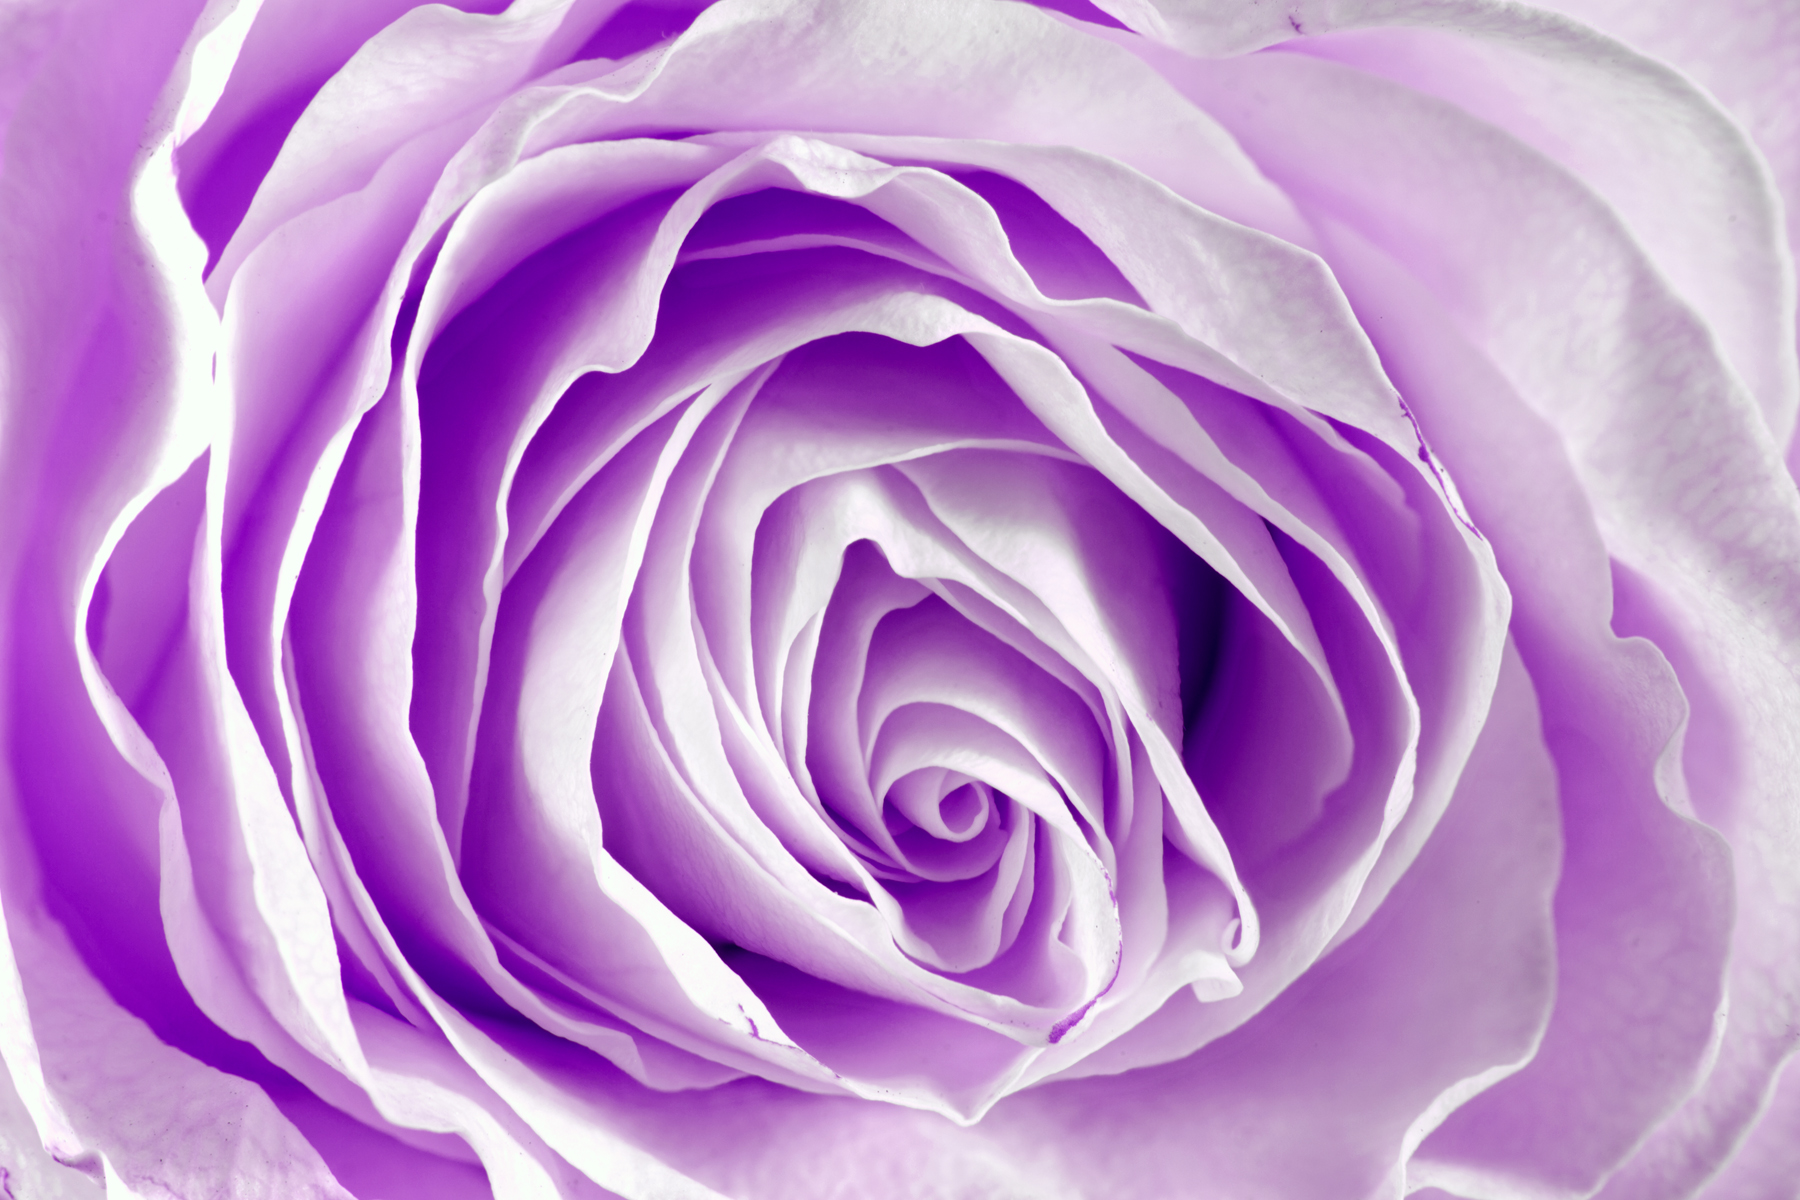 Lavender Rose   Wallpaper High Definition High Quality Widescreen